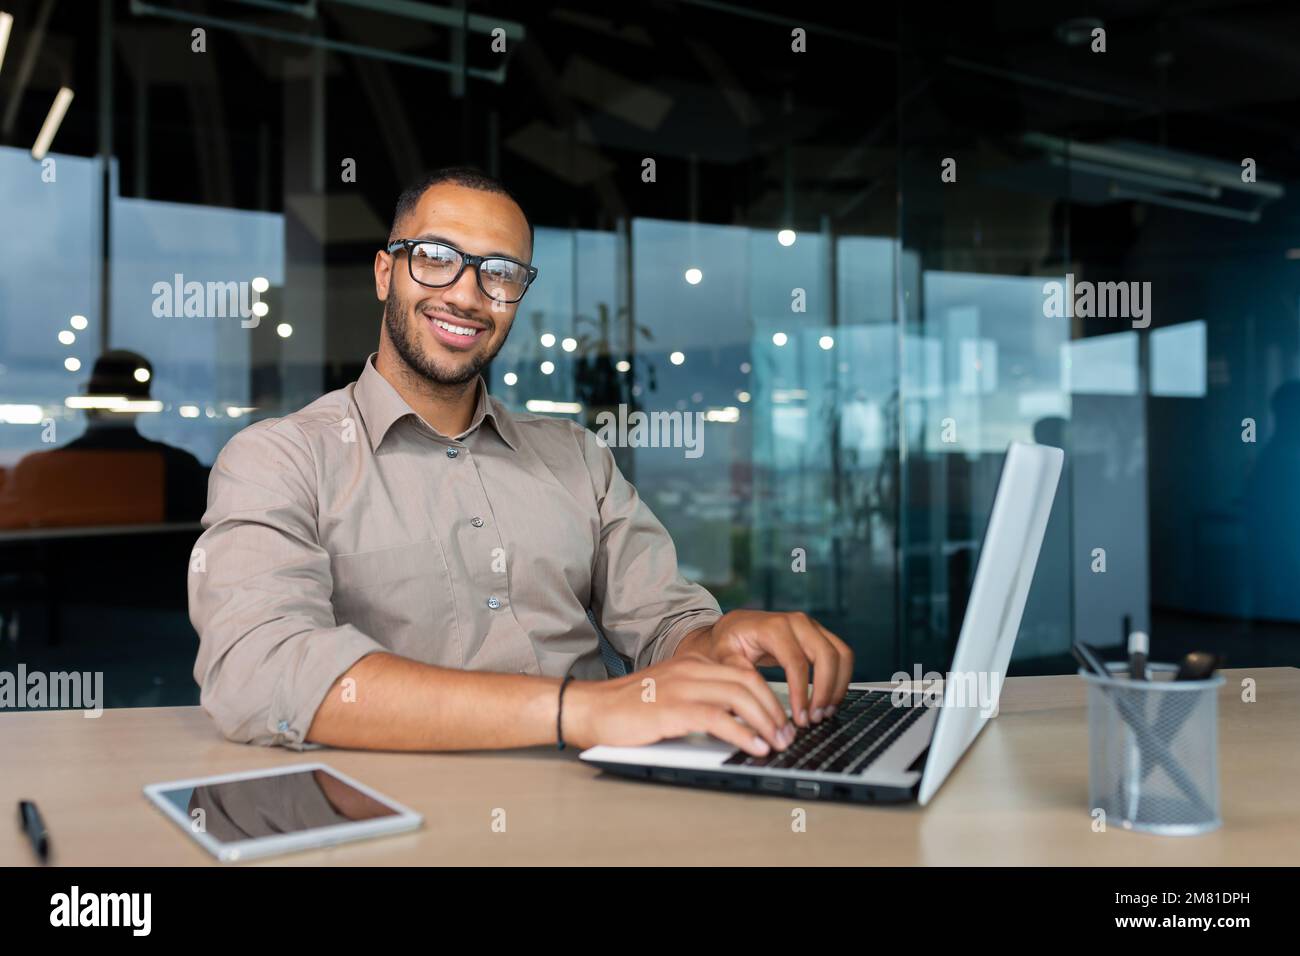 Portrait of successful hispanic businessman inside office, man with laptop working typing on keyboard smiling and looking at camera. Stock Photo